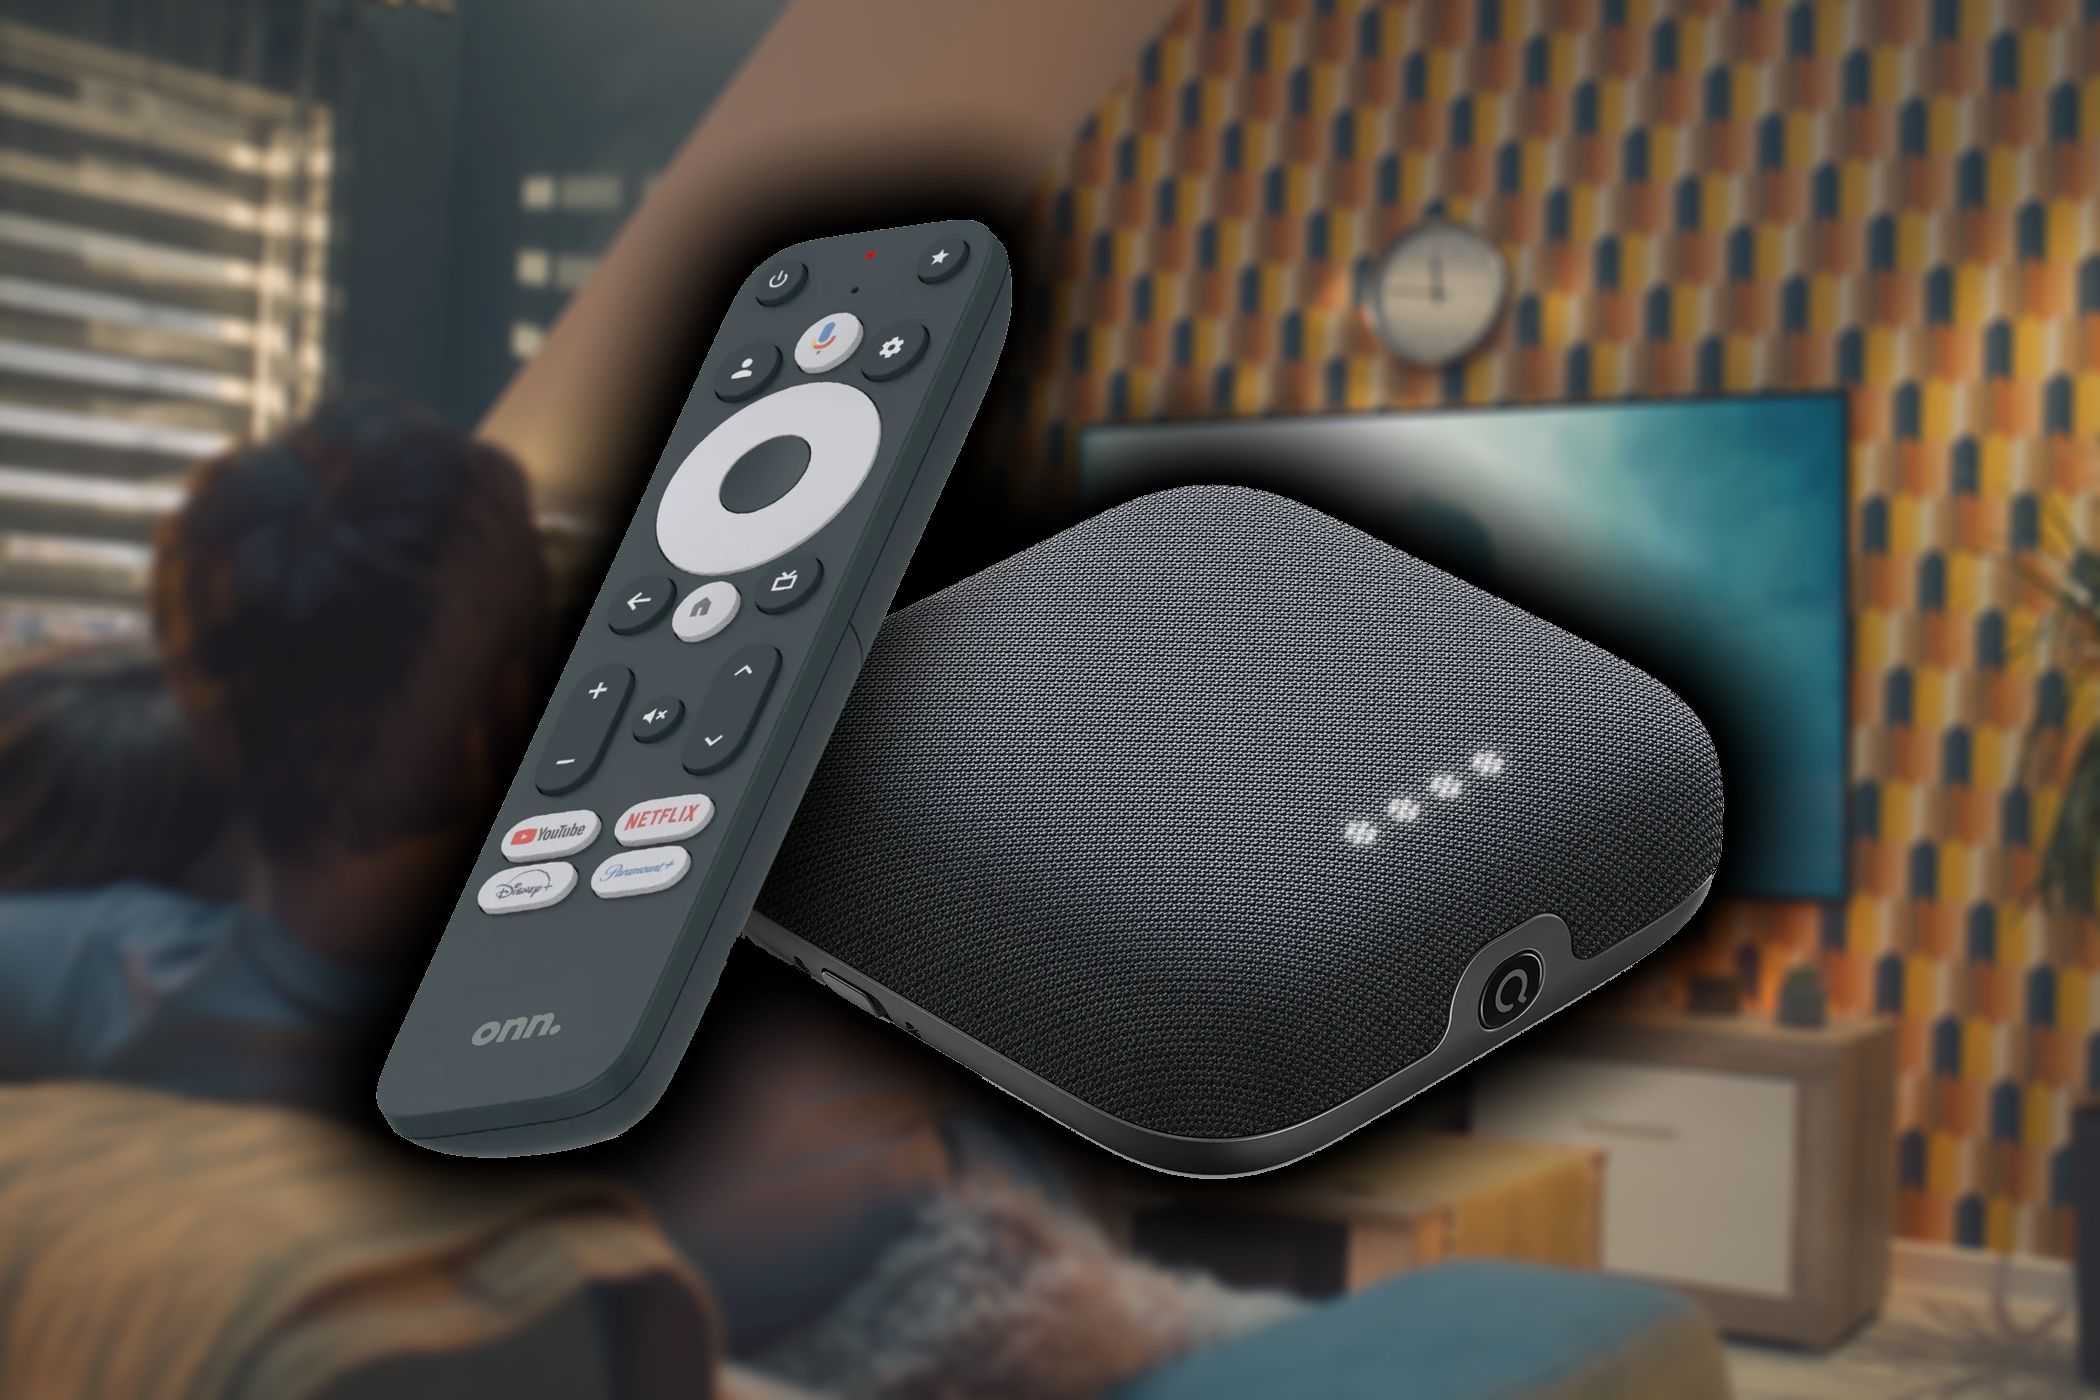 Buy This Streaming Device If You’re Tired of Waiting for Google’s Next Chromecast